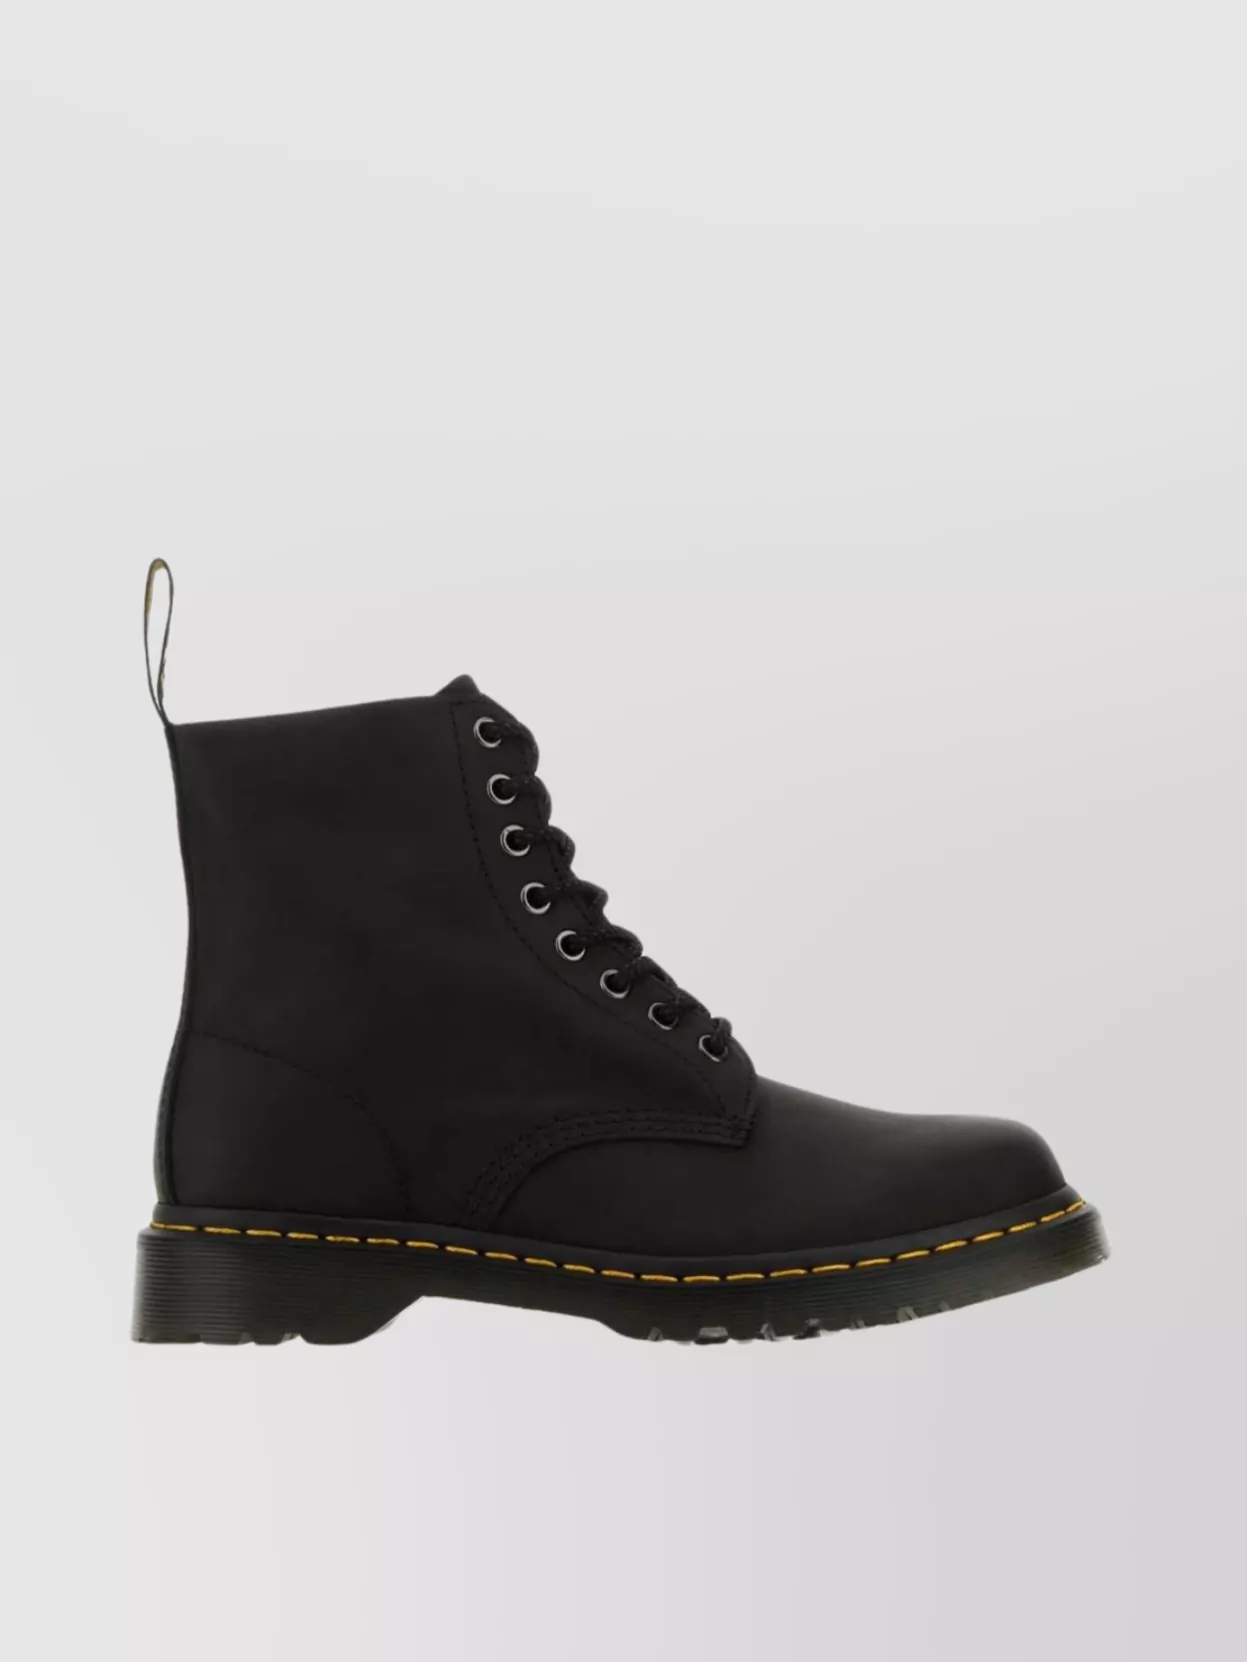 Shop Dr. Martens' Leather Ankle Boots 1460 With Contrast Stitching